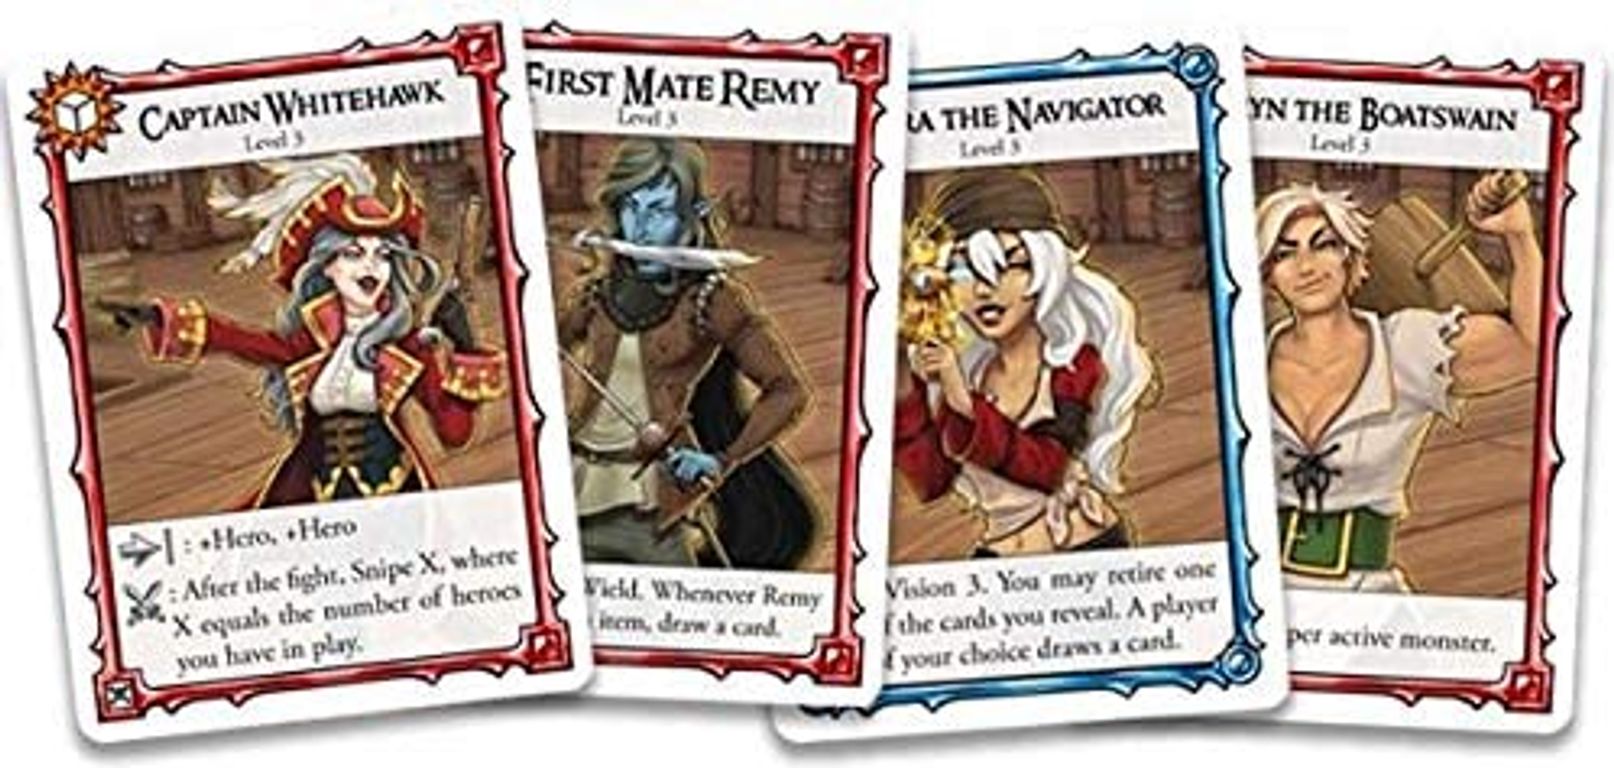 The Red Dragon Inn: Battle for Greyport – Pirates! cards